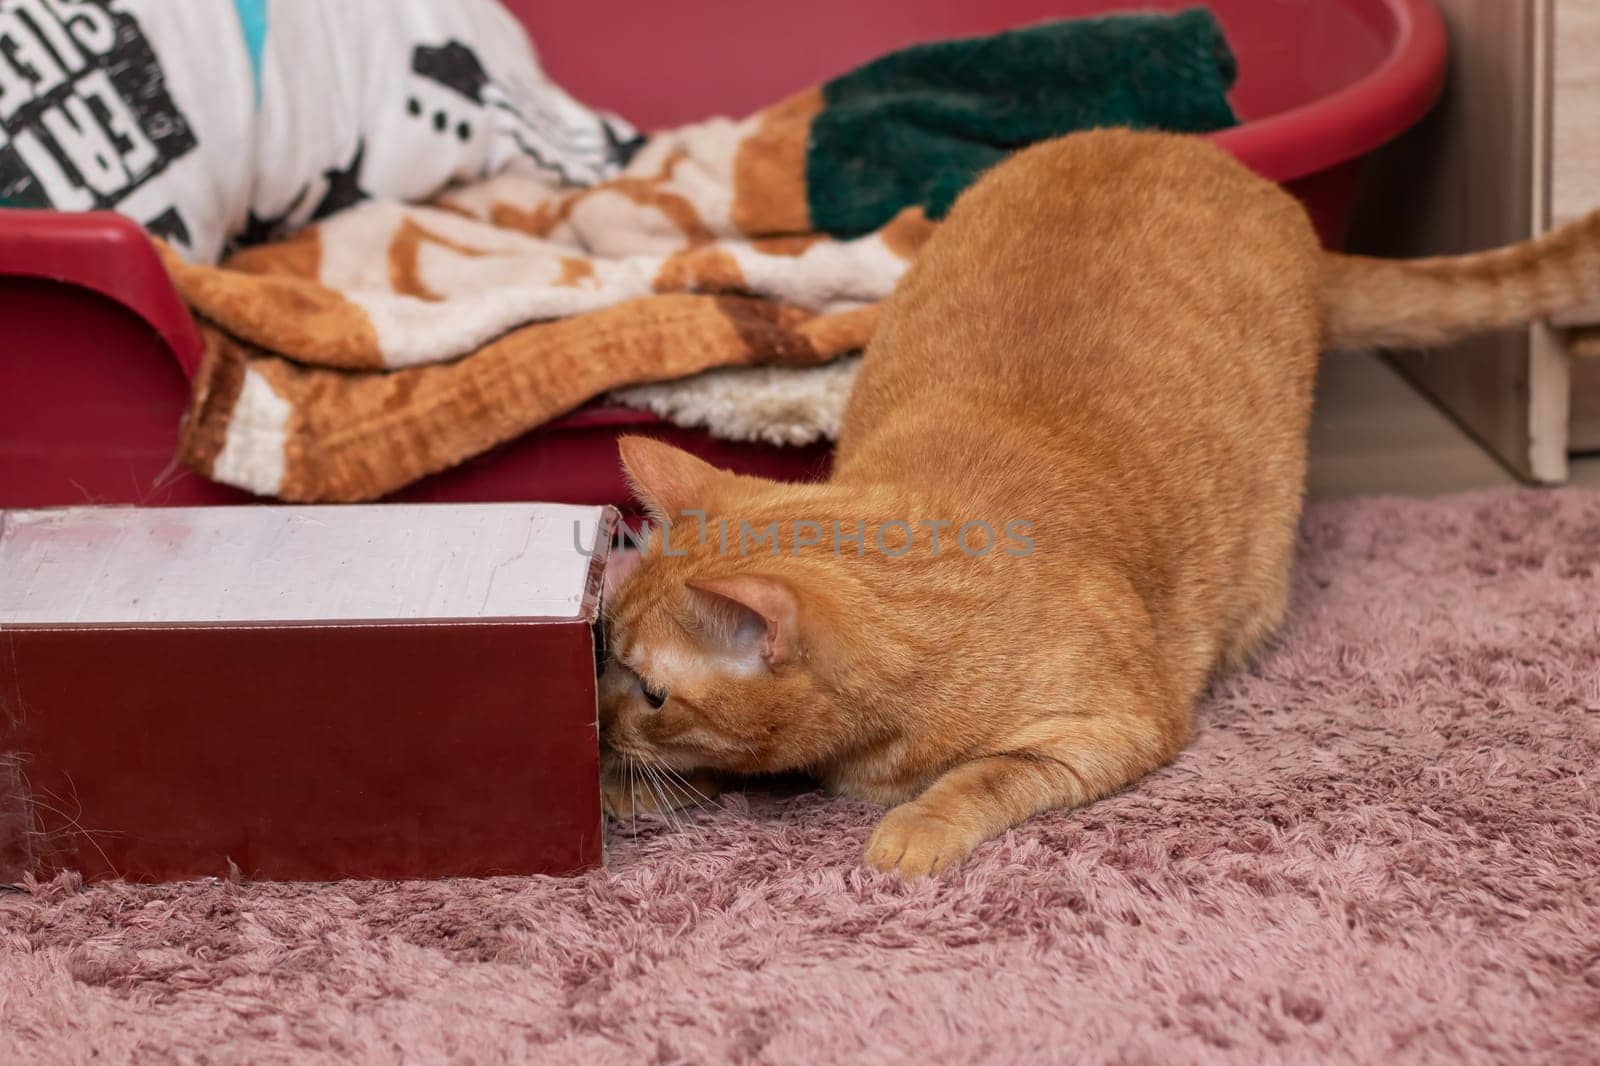 A feline Felidae, with orange fur and whiskers, lounges on a pink rug near a wooden box labeled Friday. The small to mediumsized cat finds comfort on the soft flooring